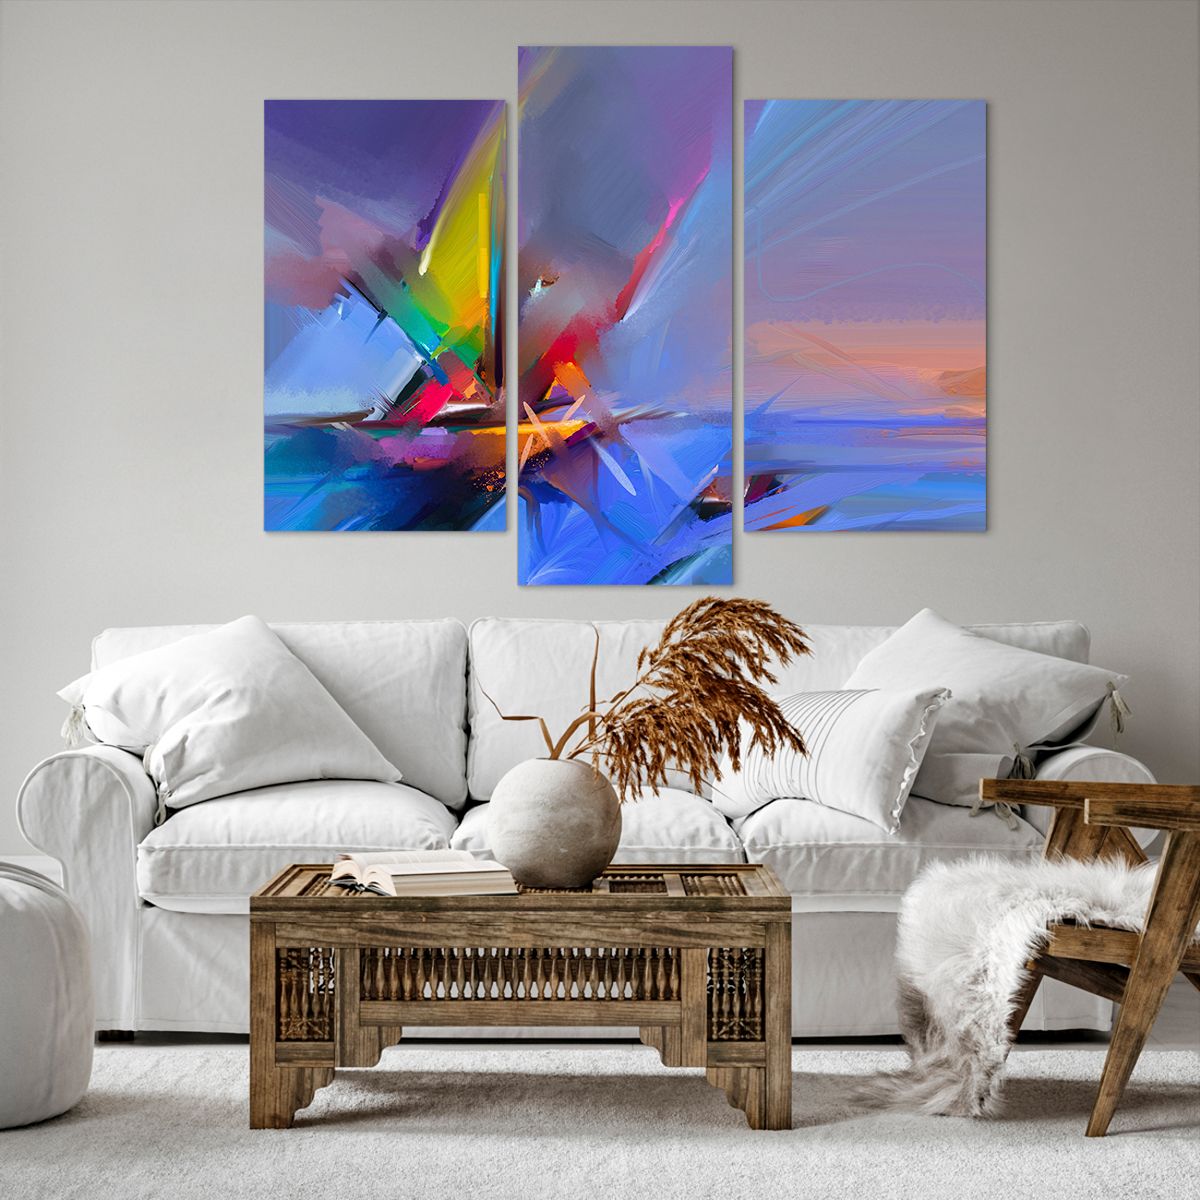 Impression sur toile Abstraction, Impression sur toile Art, Impression sur toile Voilier, Impression sur toile Art Moderne, Impression sur toile Peinture